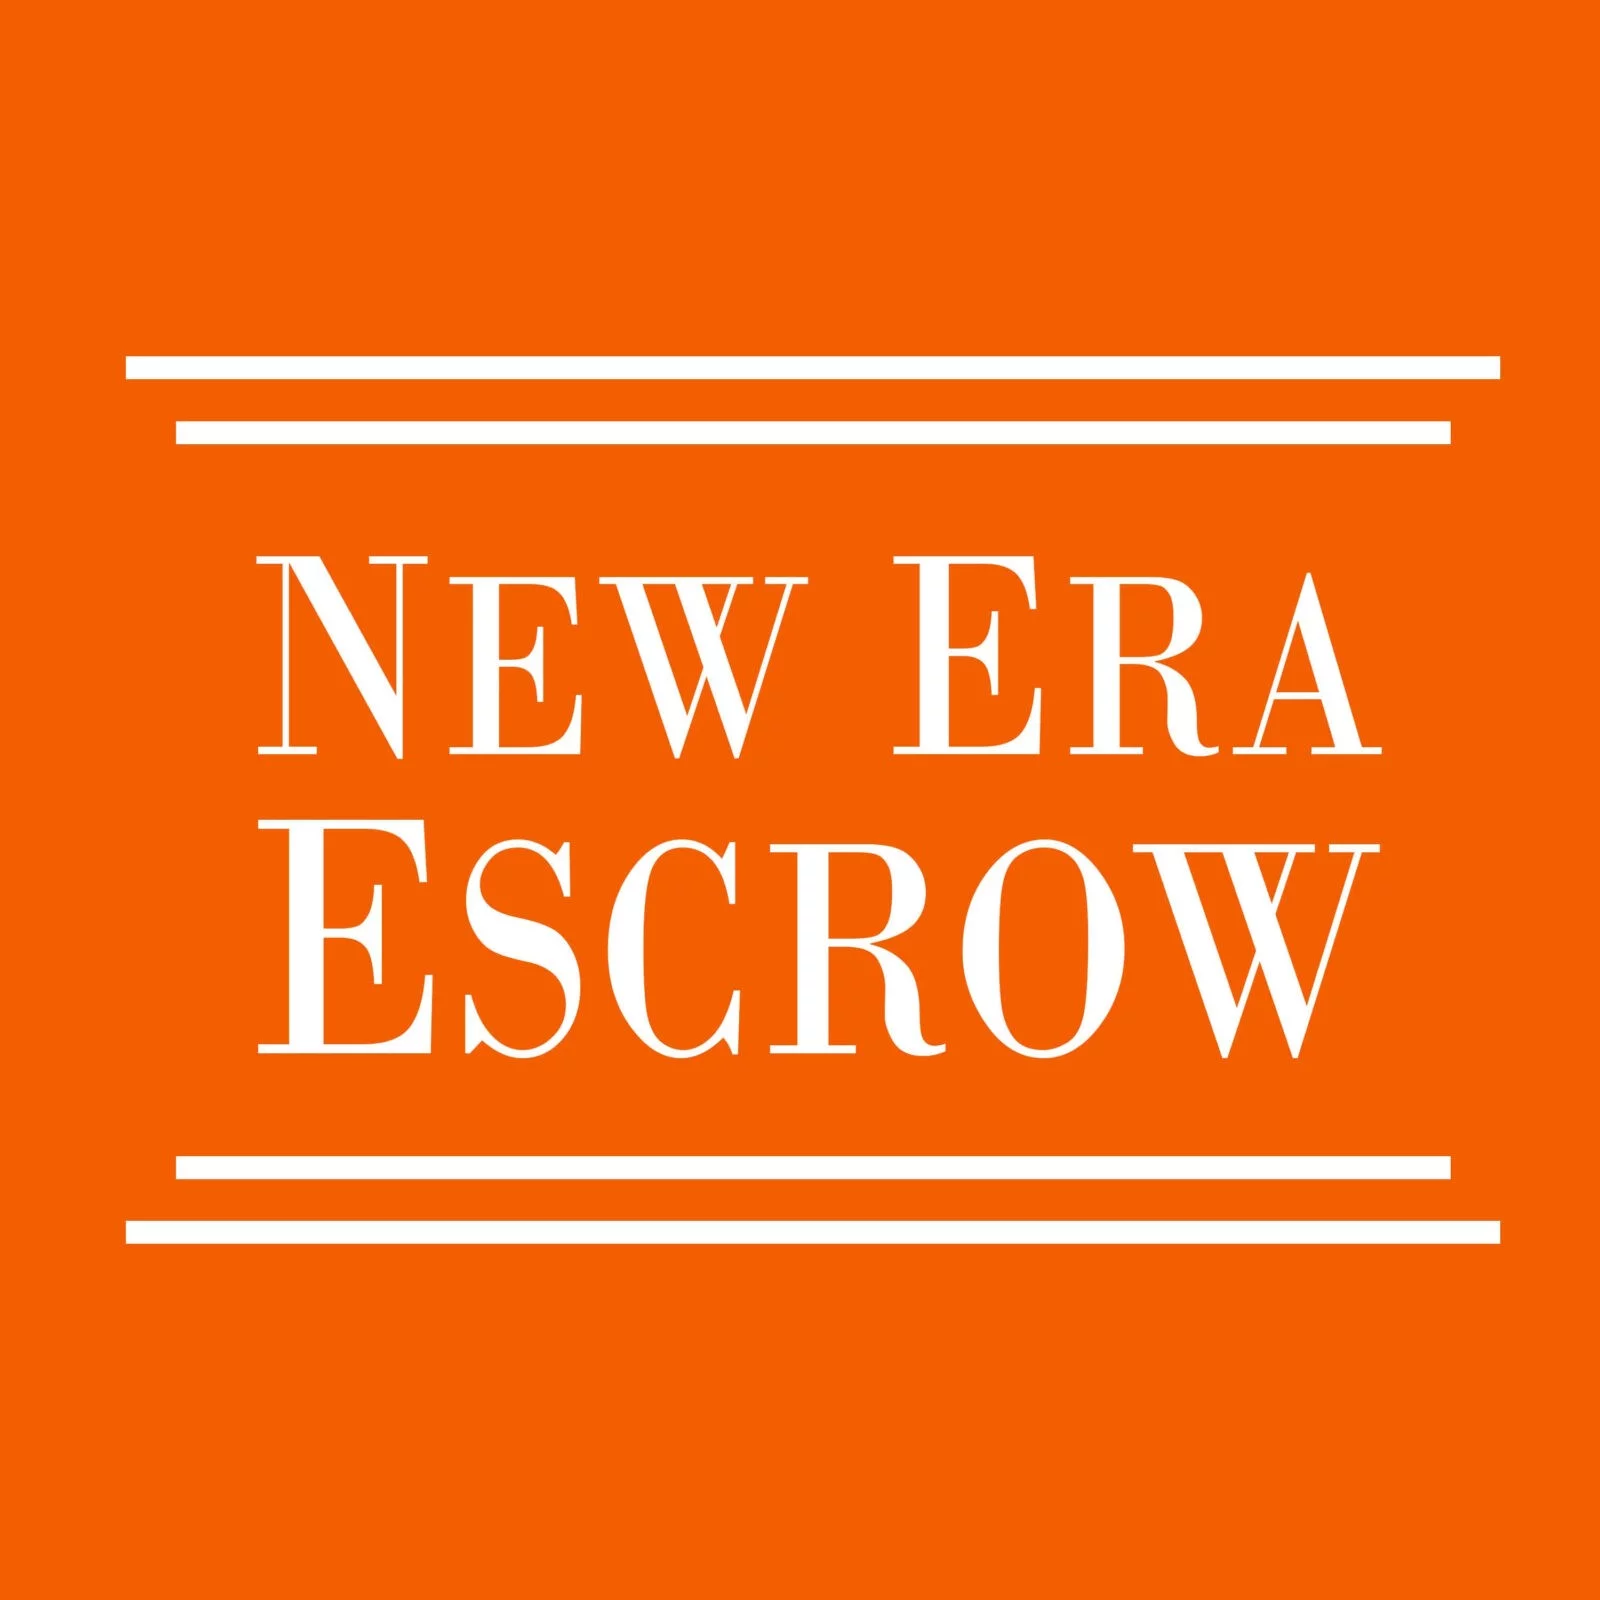 New Branch Manager - Premier Escrow Service Company - Short Sale Escrow Services - Trust Escrow Services Los Angeles